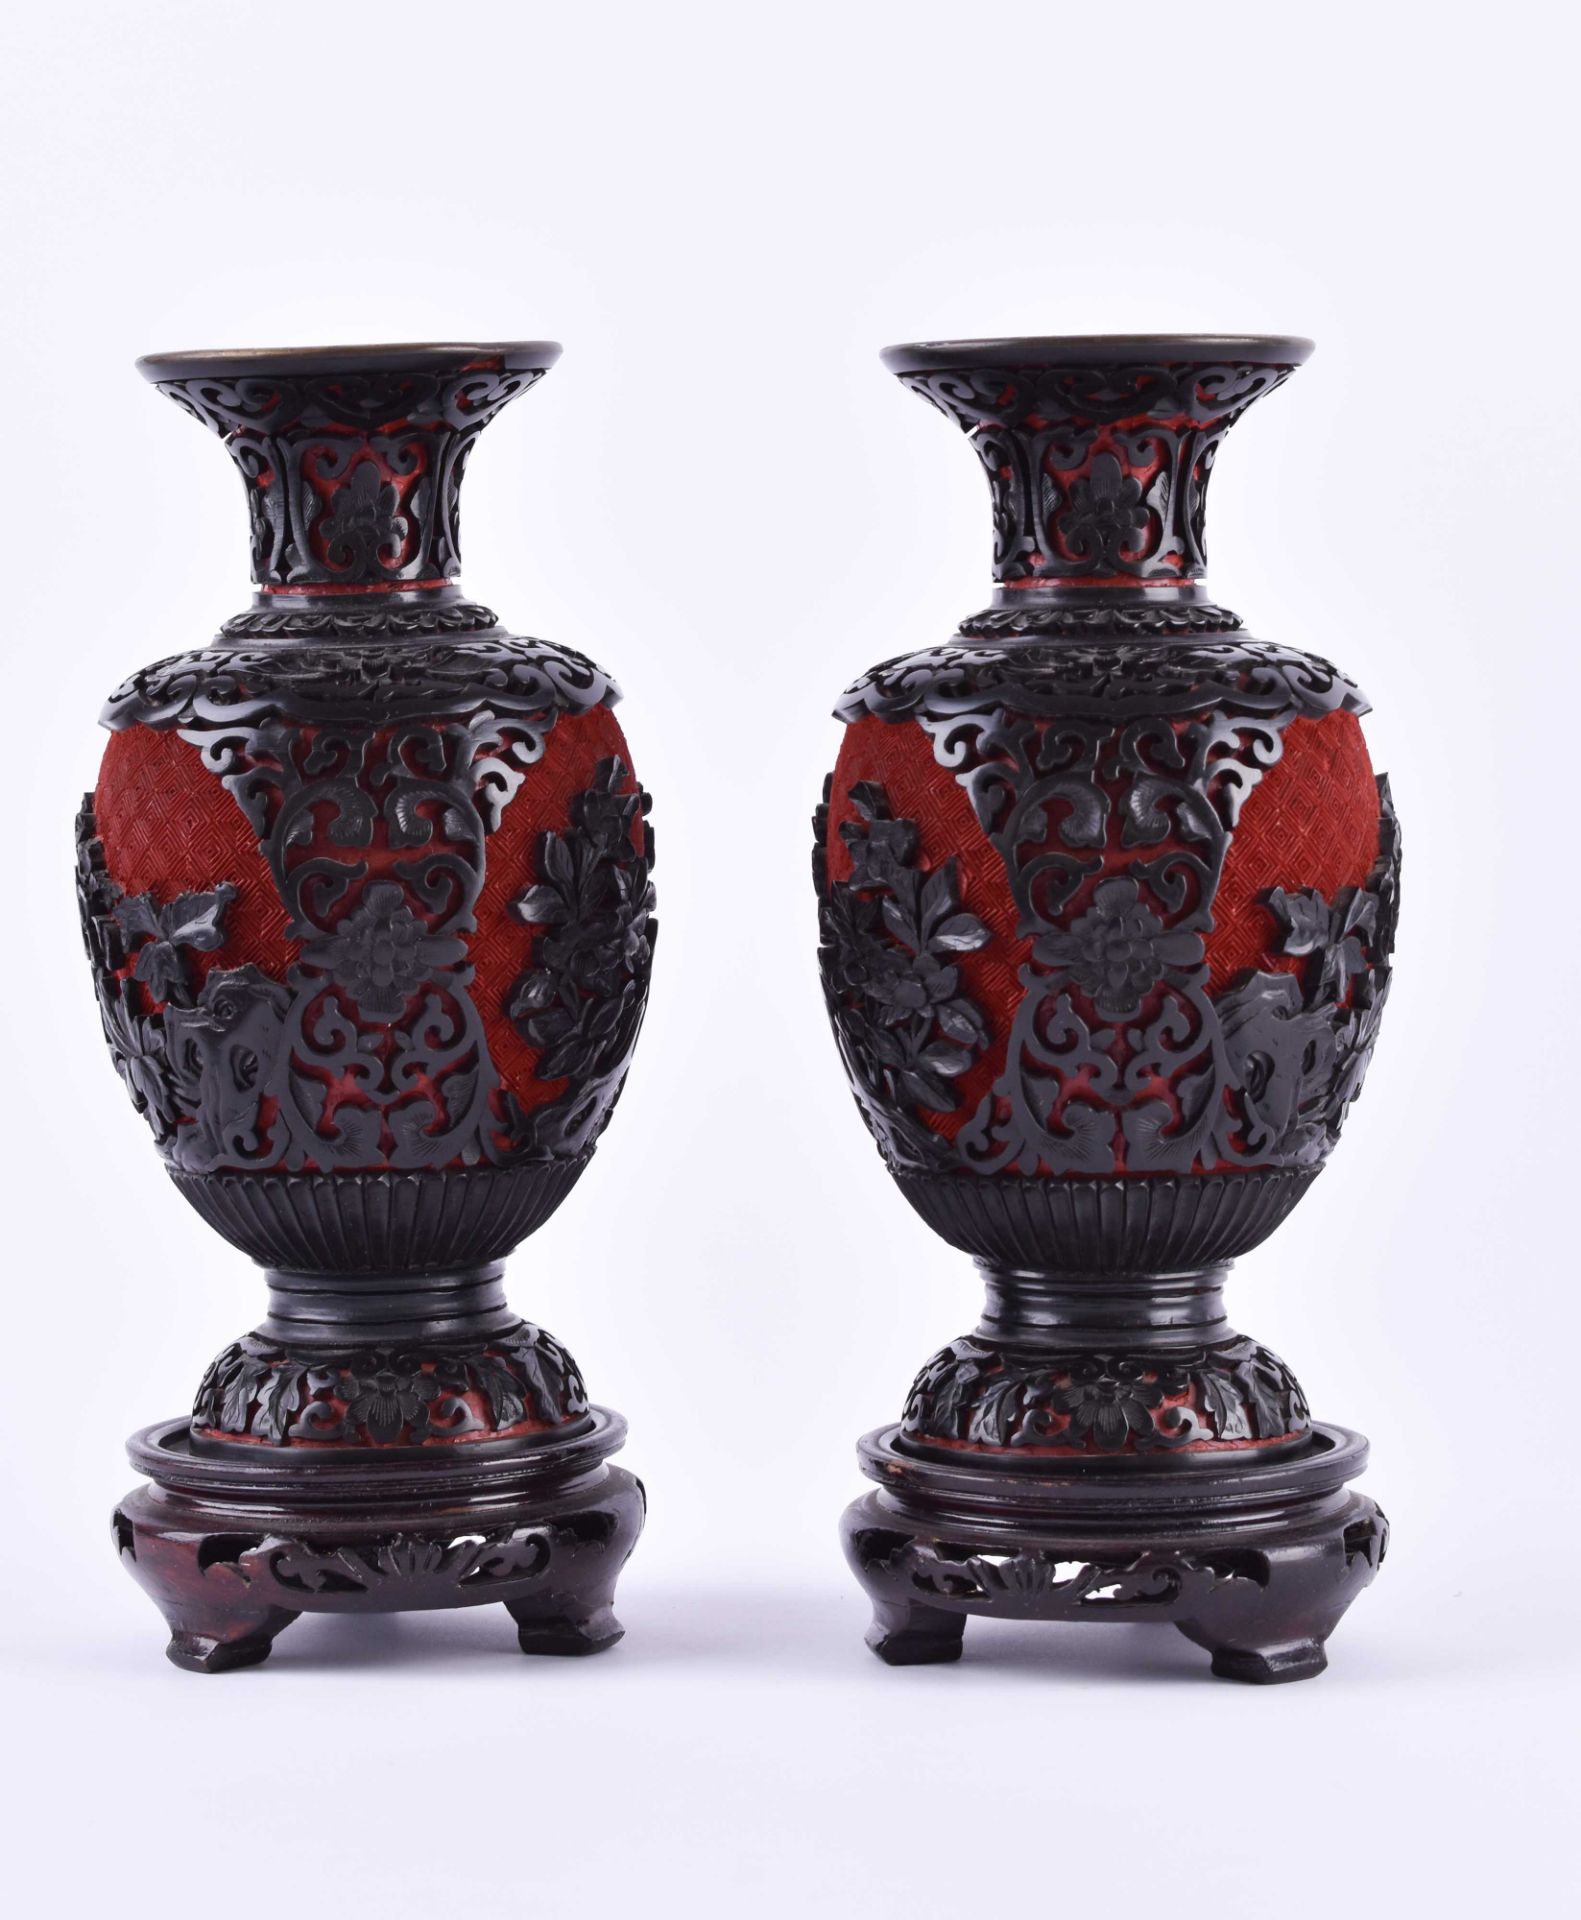 Pair of lacquer vases China 20th centuryeach standing on a wooden base, total height 21 cmPaar - Image 2 of 6